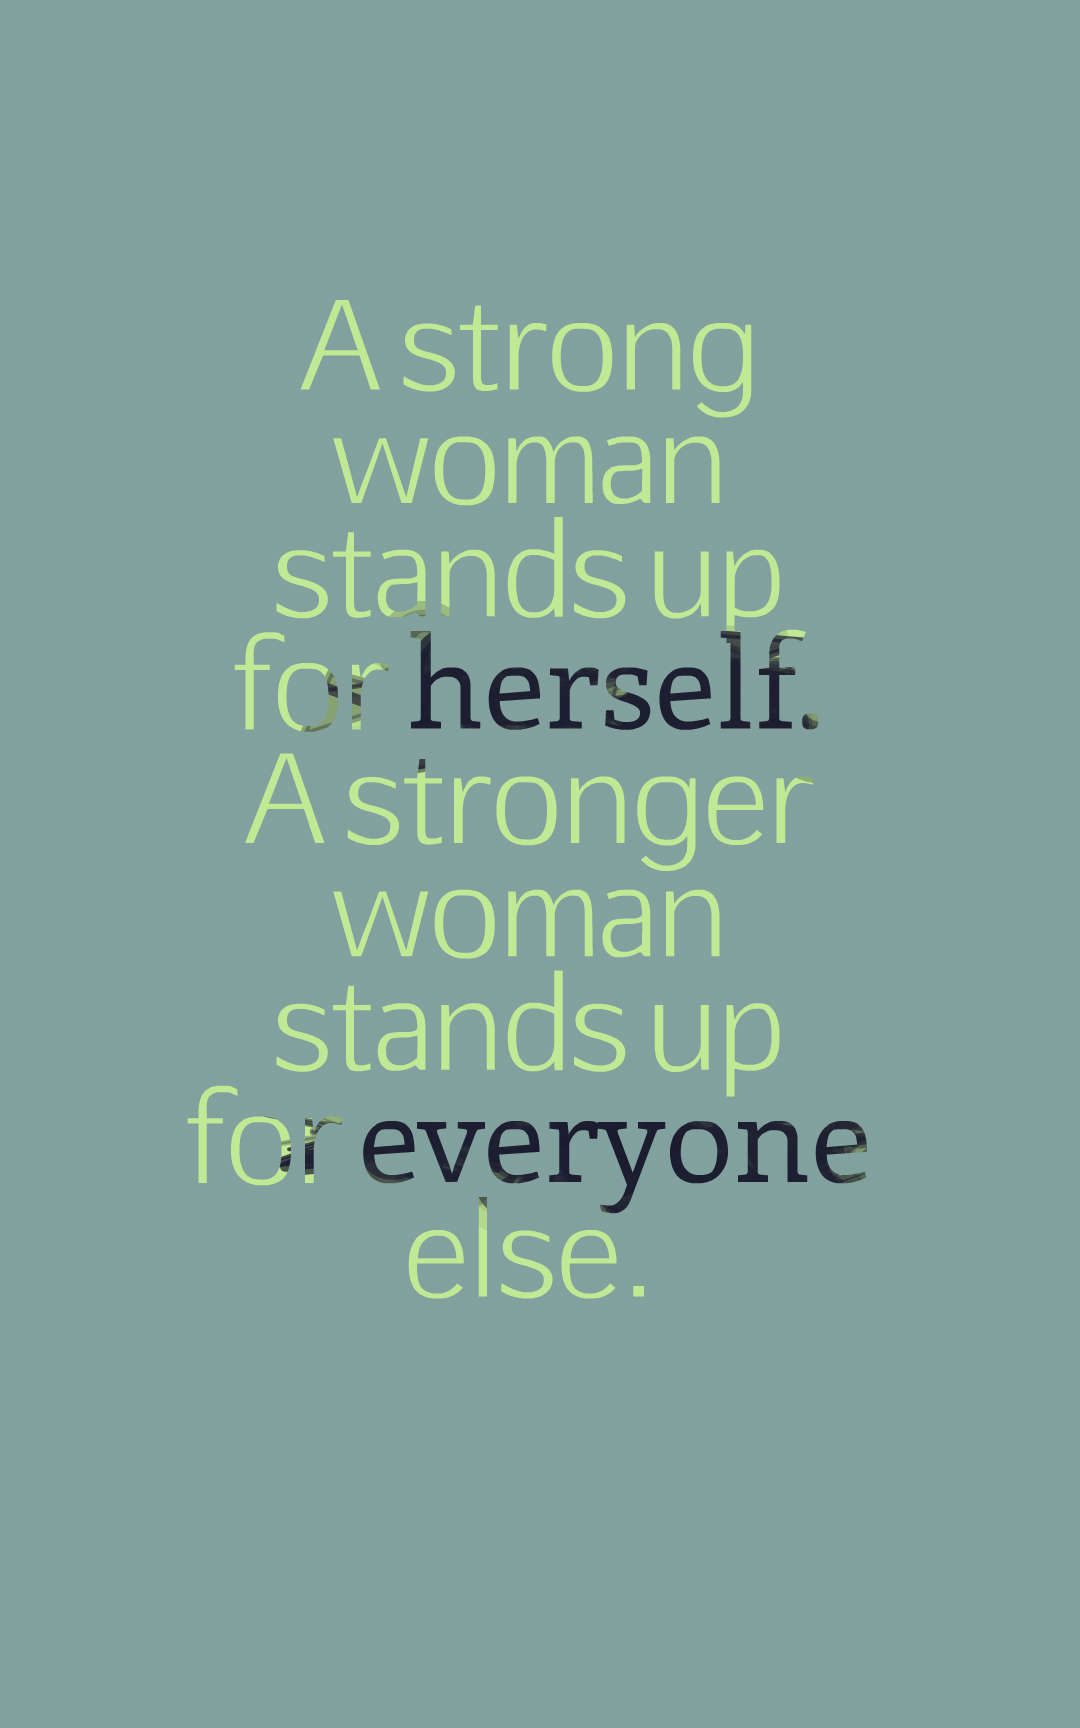 A strong woman stands up for herself. A stronger woman stands up for everyone else.